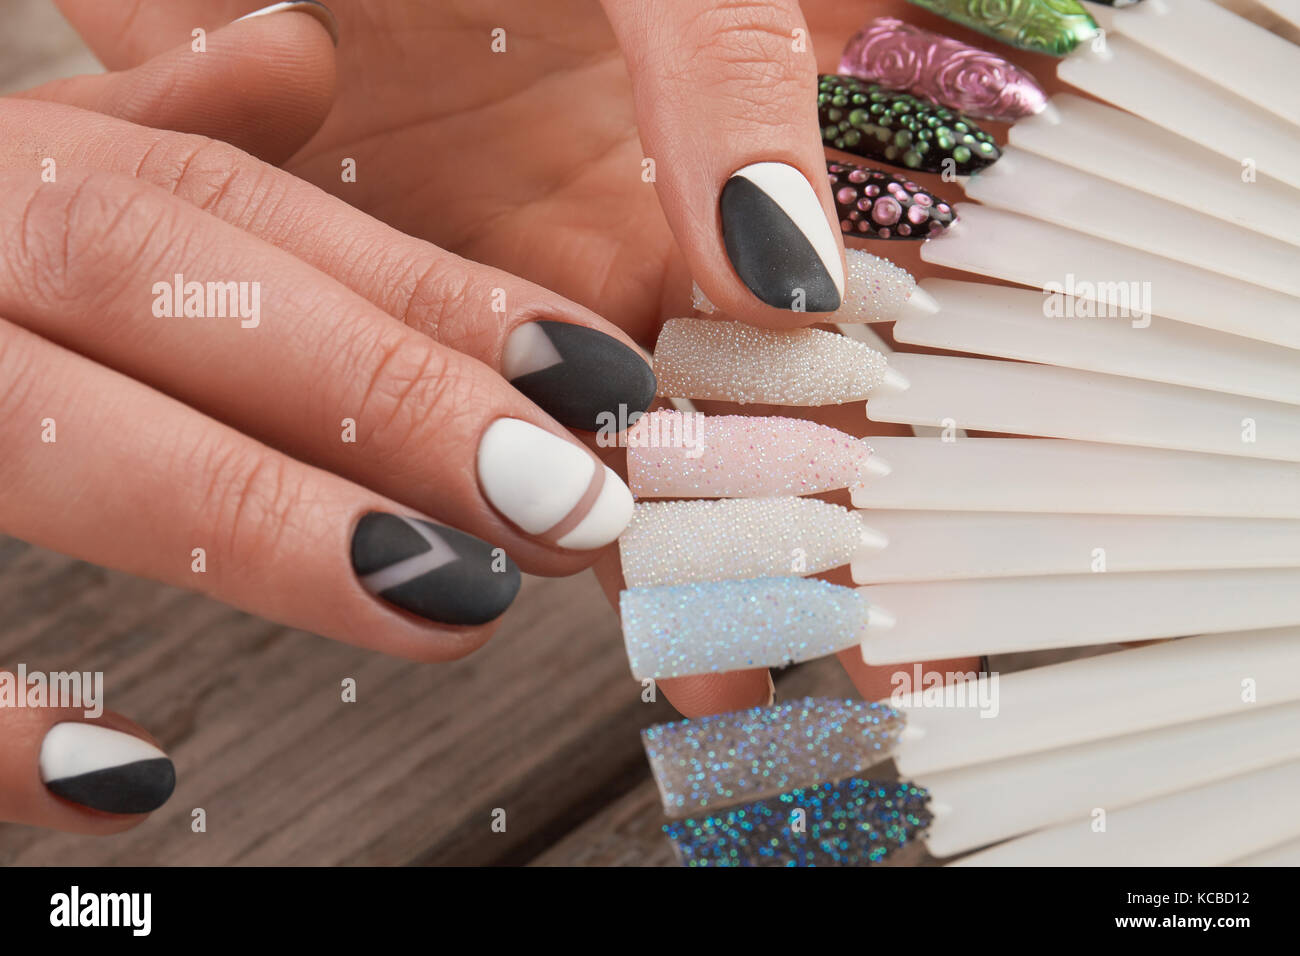 Fashion nail art samples in female hands. Stock Photo